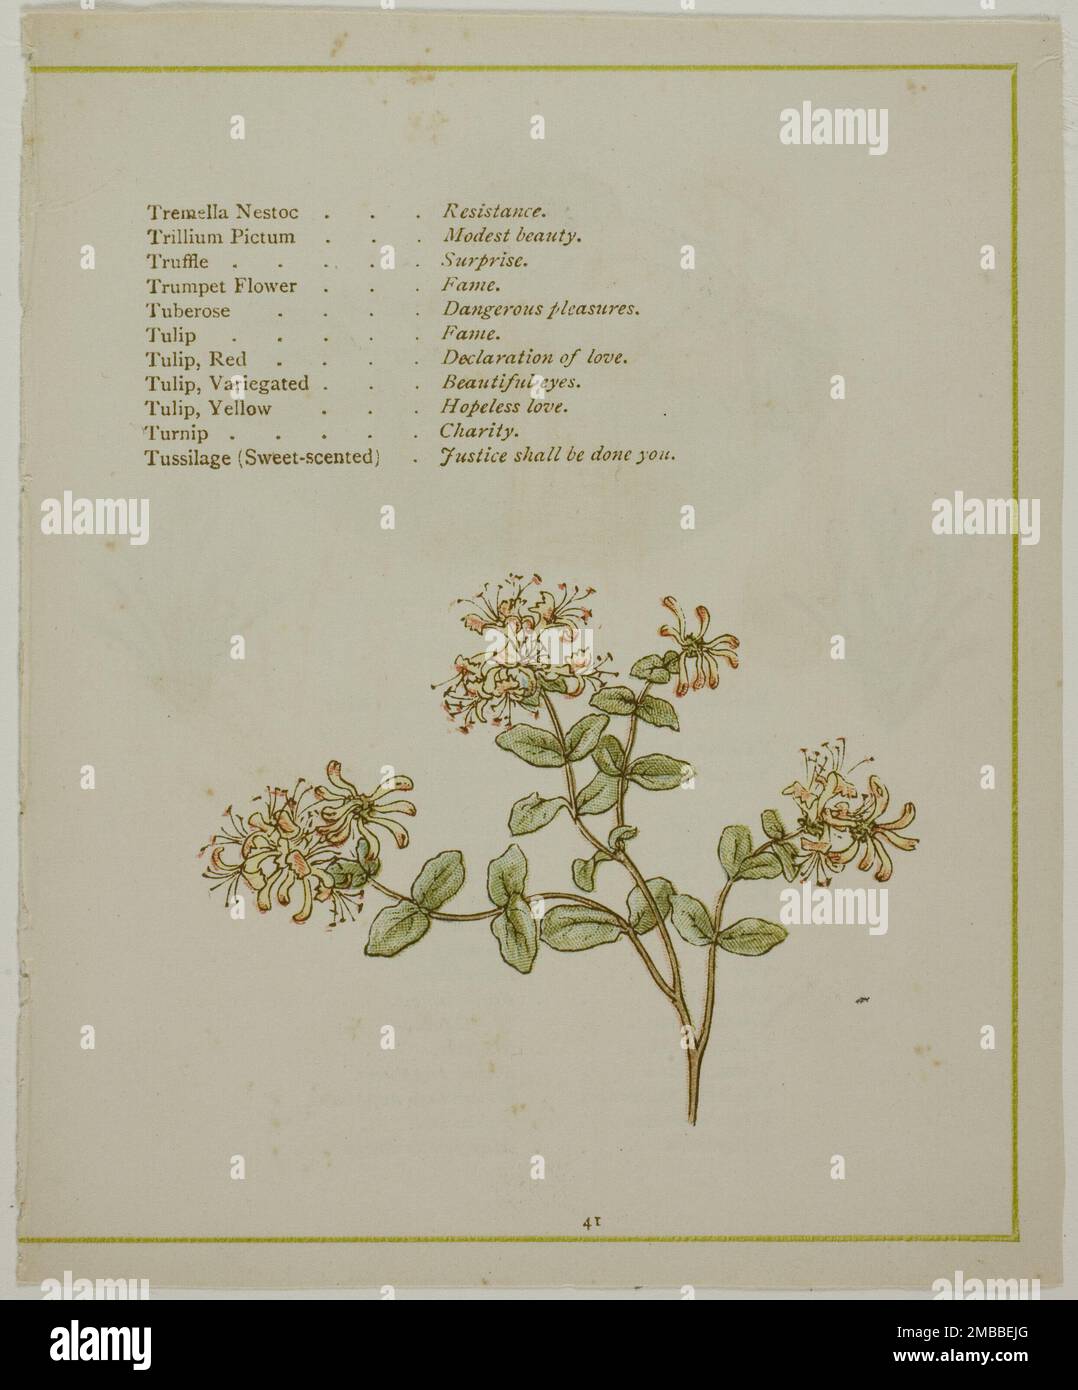 Valerian Through Volkamenia, from The Illuminated Language of Flowers, published 1884. Probably by Edmund Evans after Kate Greenaway. Stock Photo